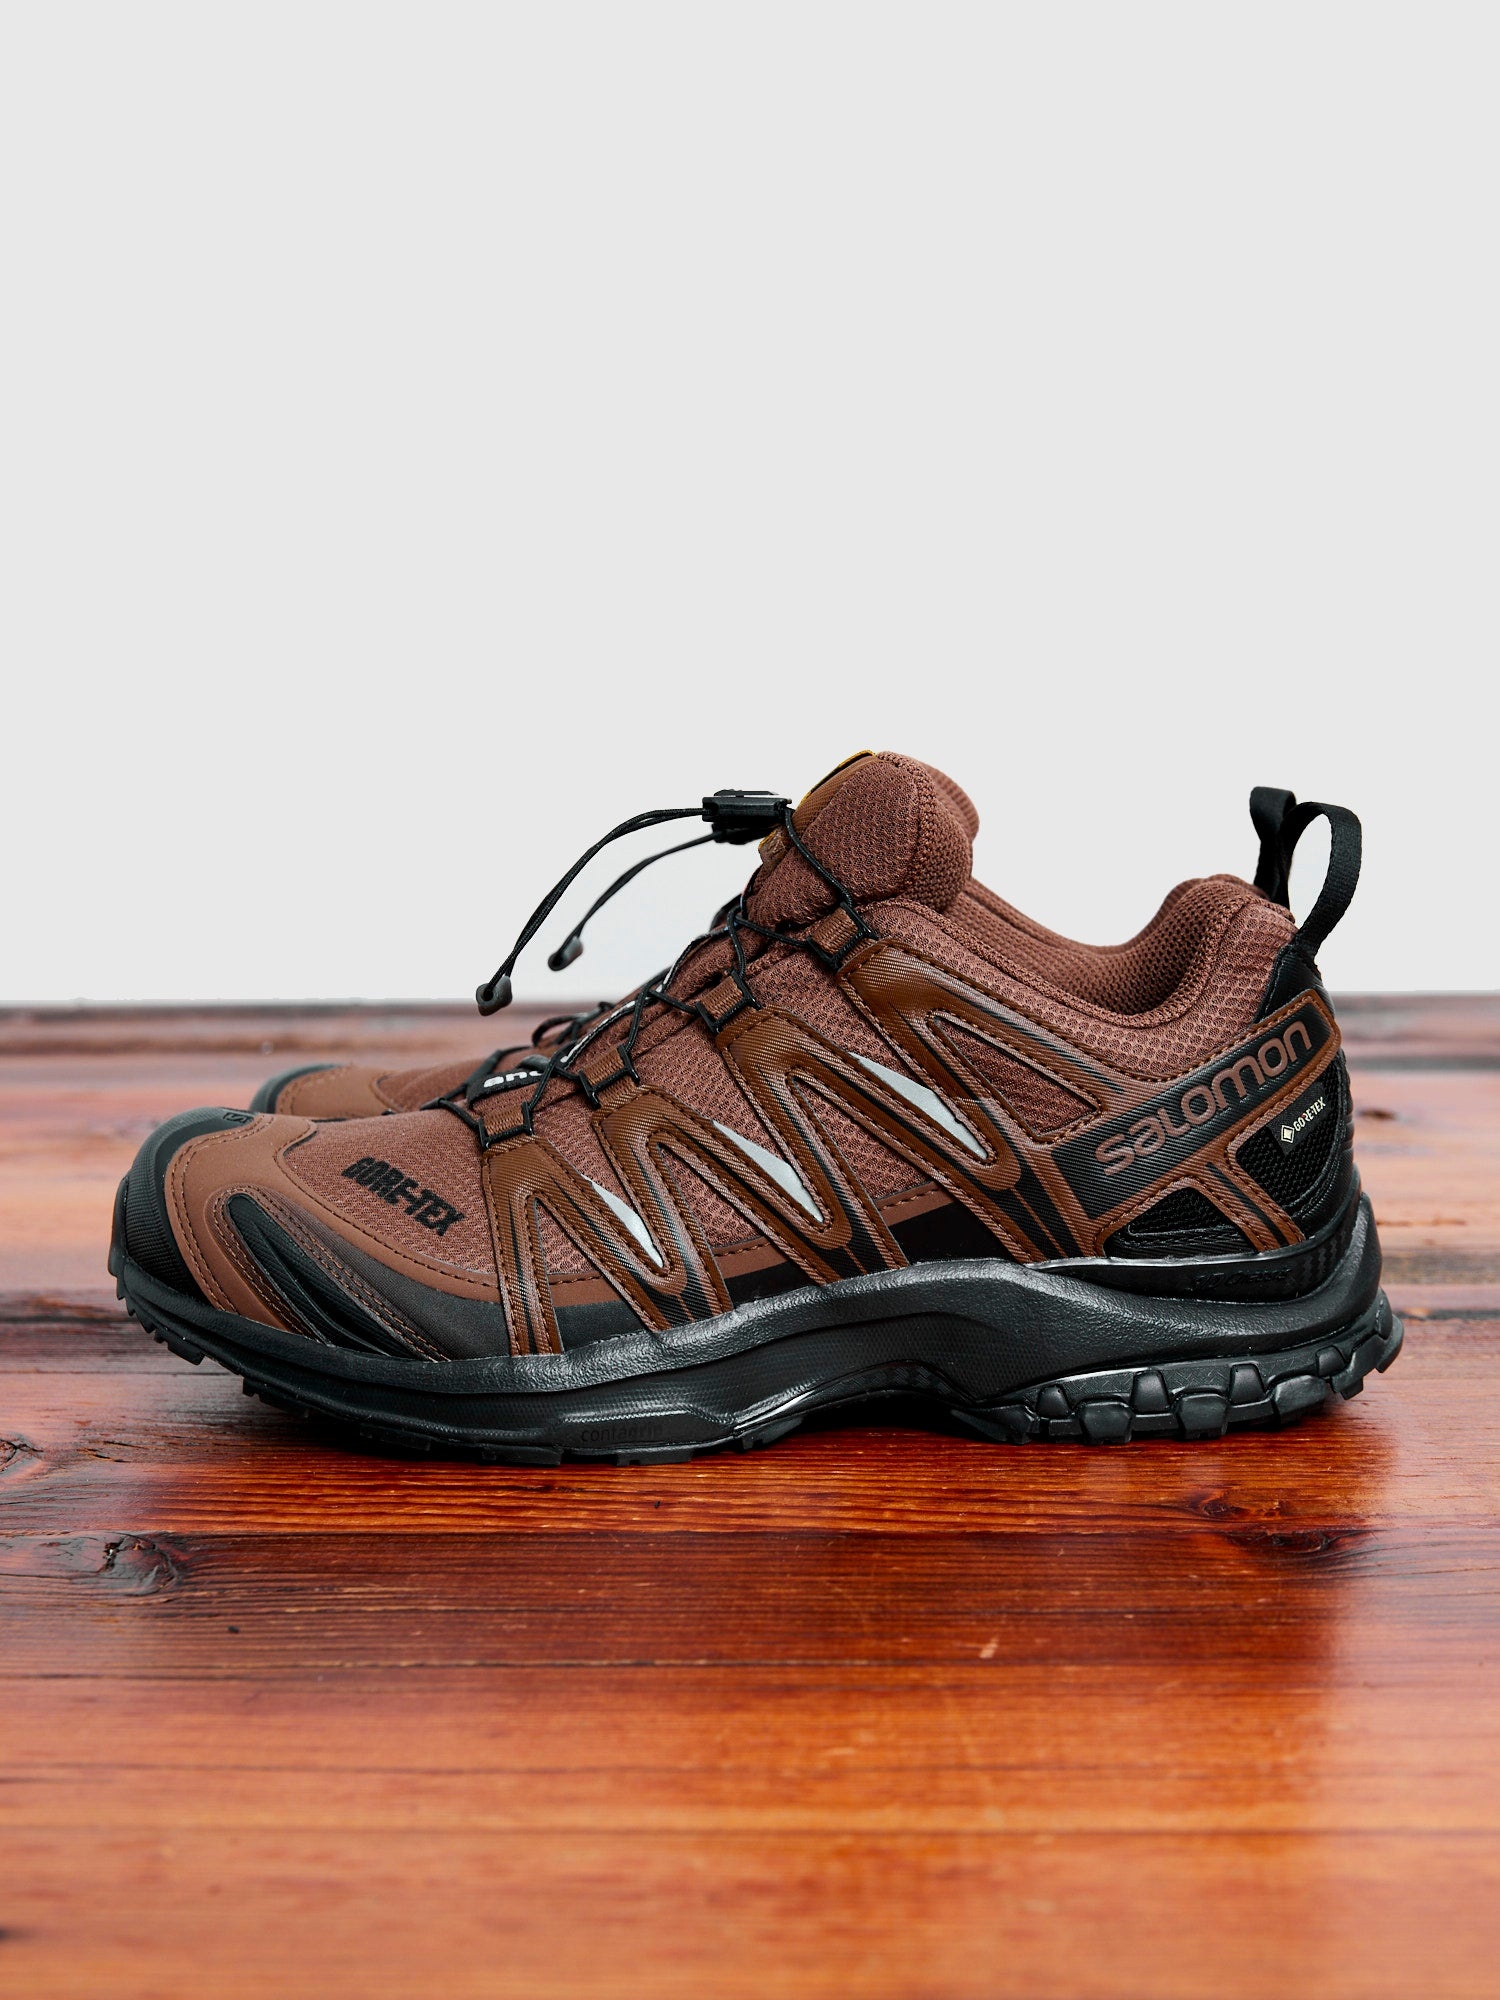 Salomon XA Pro 3D for and Wander in Brown - 3